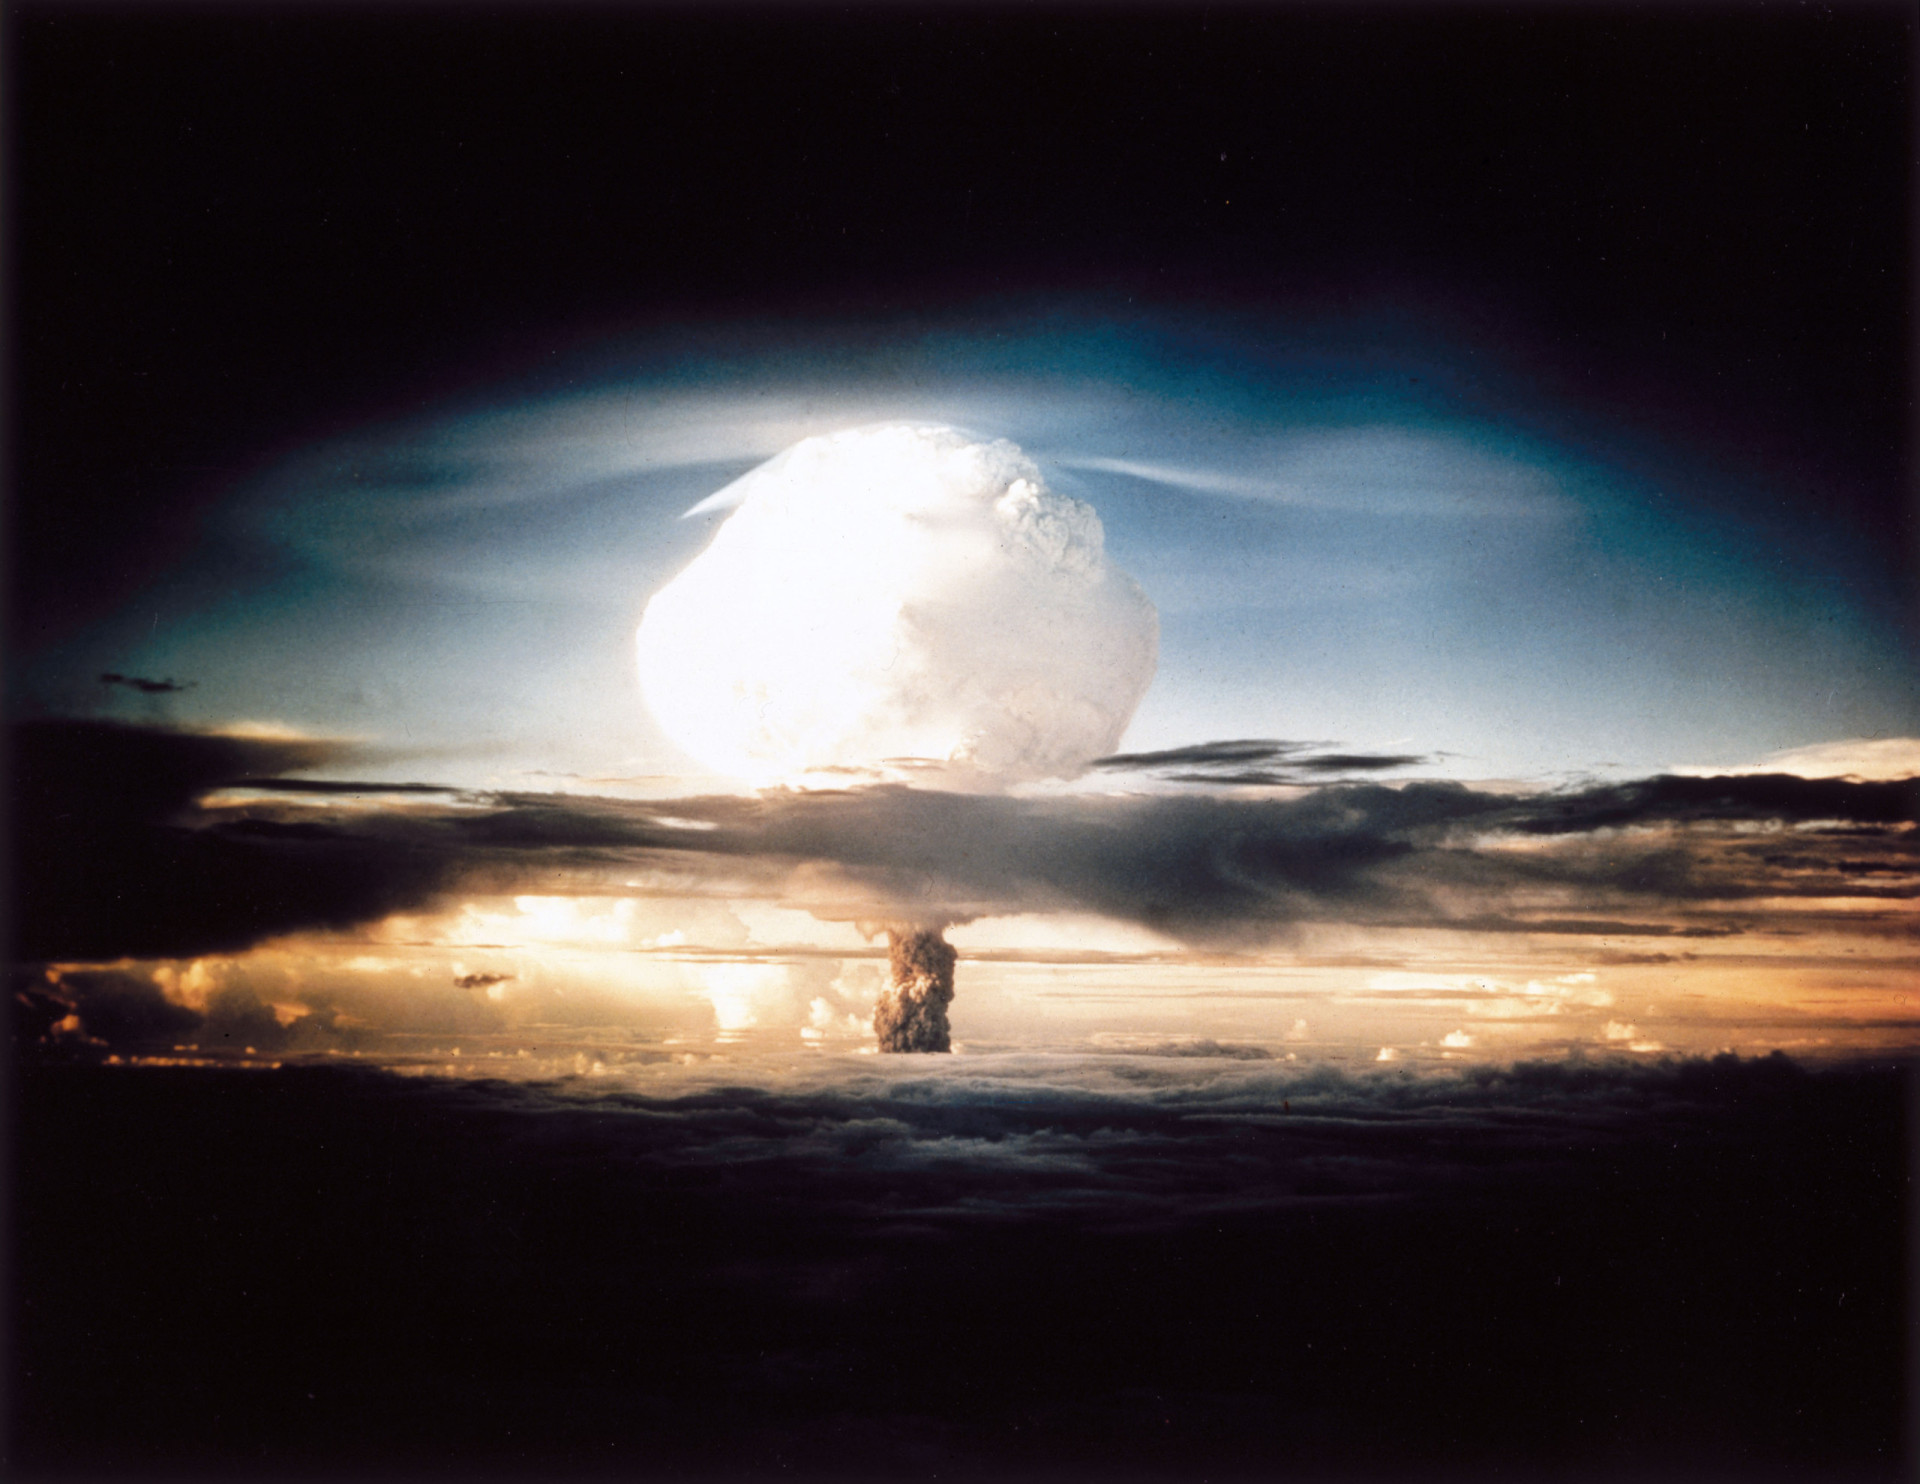 <p>The plan was essentially to detonate a hydrogen bomb on the Moon. Hydrogen bombs were significantly more destructive than the atomic bombs dropped by the US in Japan, and America wanted to show the world exactly how devastating they could be.</p>